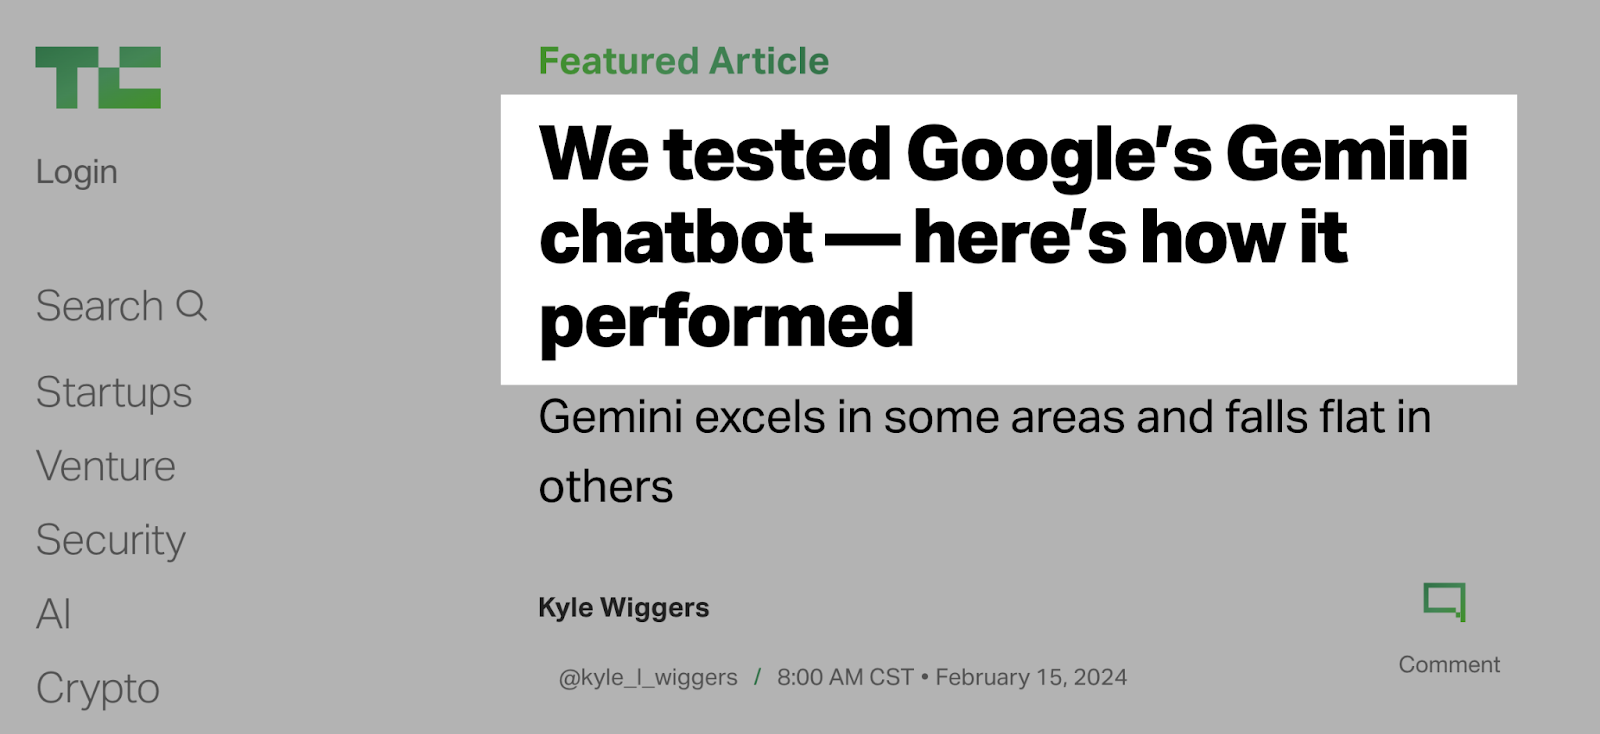  "We tested Google’s Gemini chatbot—here’s however  it performed"